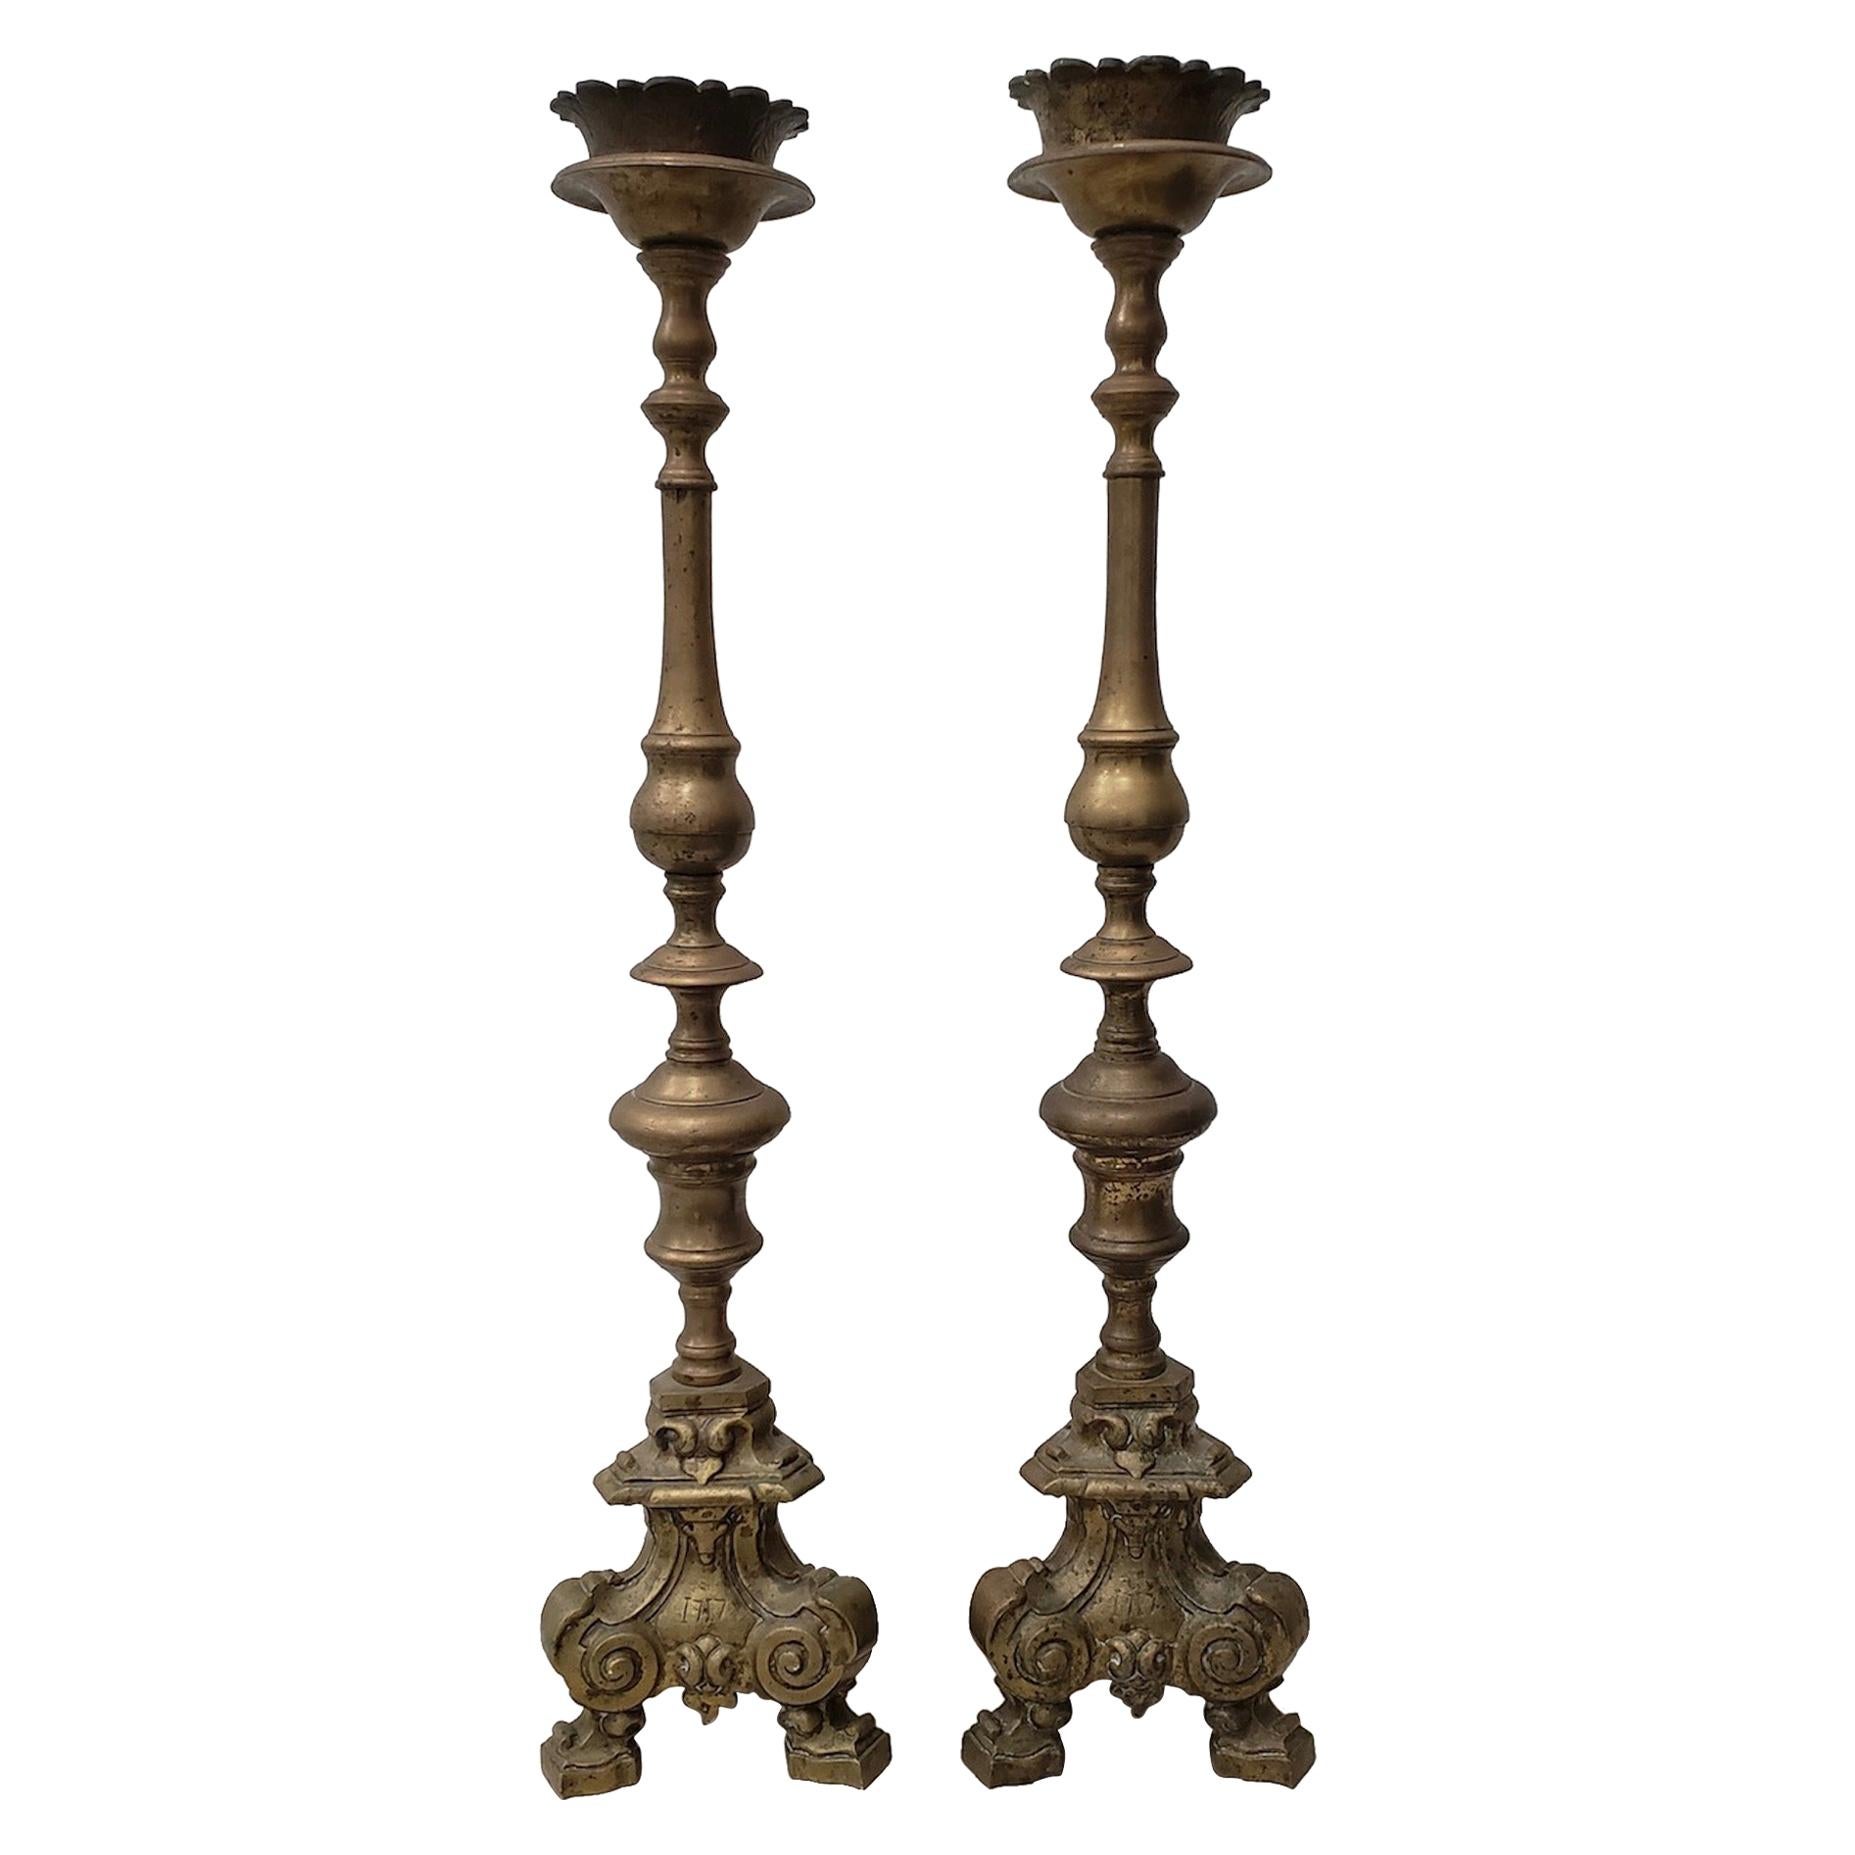 Pair of Early 18th Century Brass Altar / Mantel Candleholders, circa 1717 For Sale